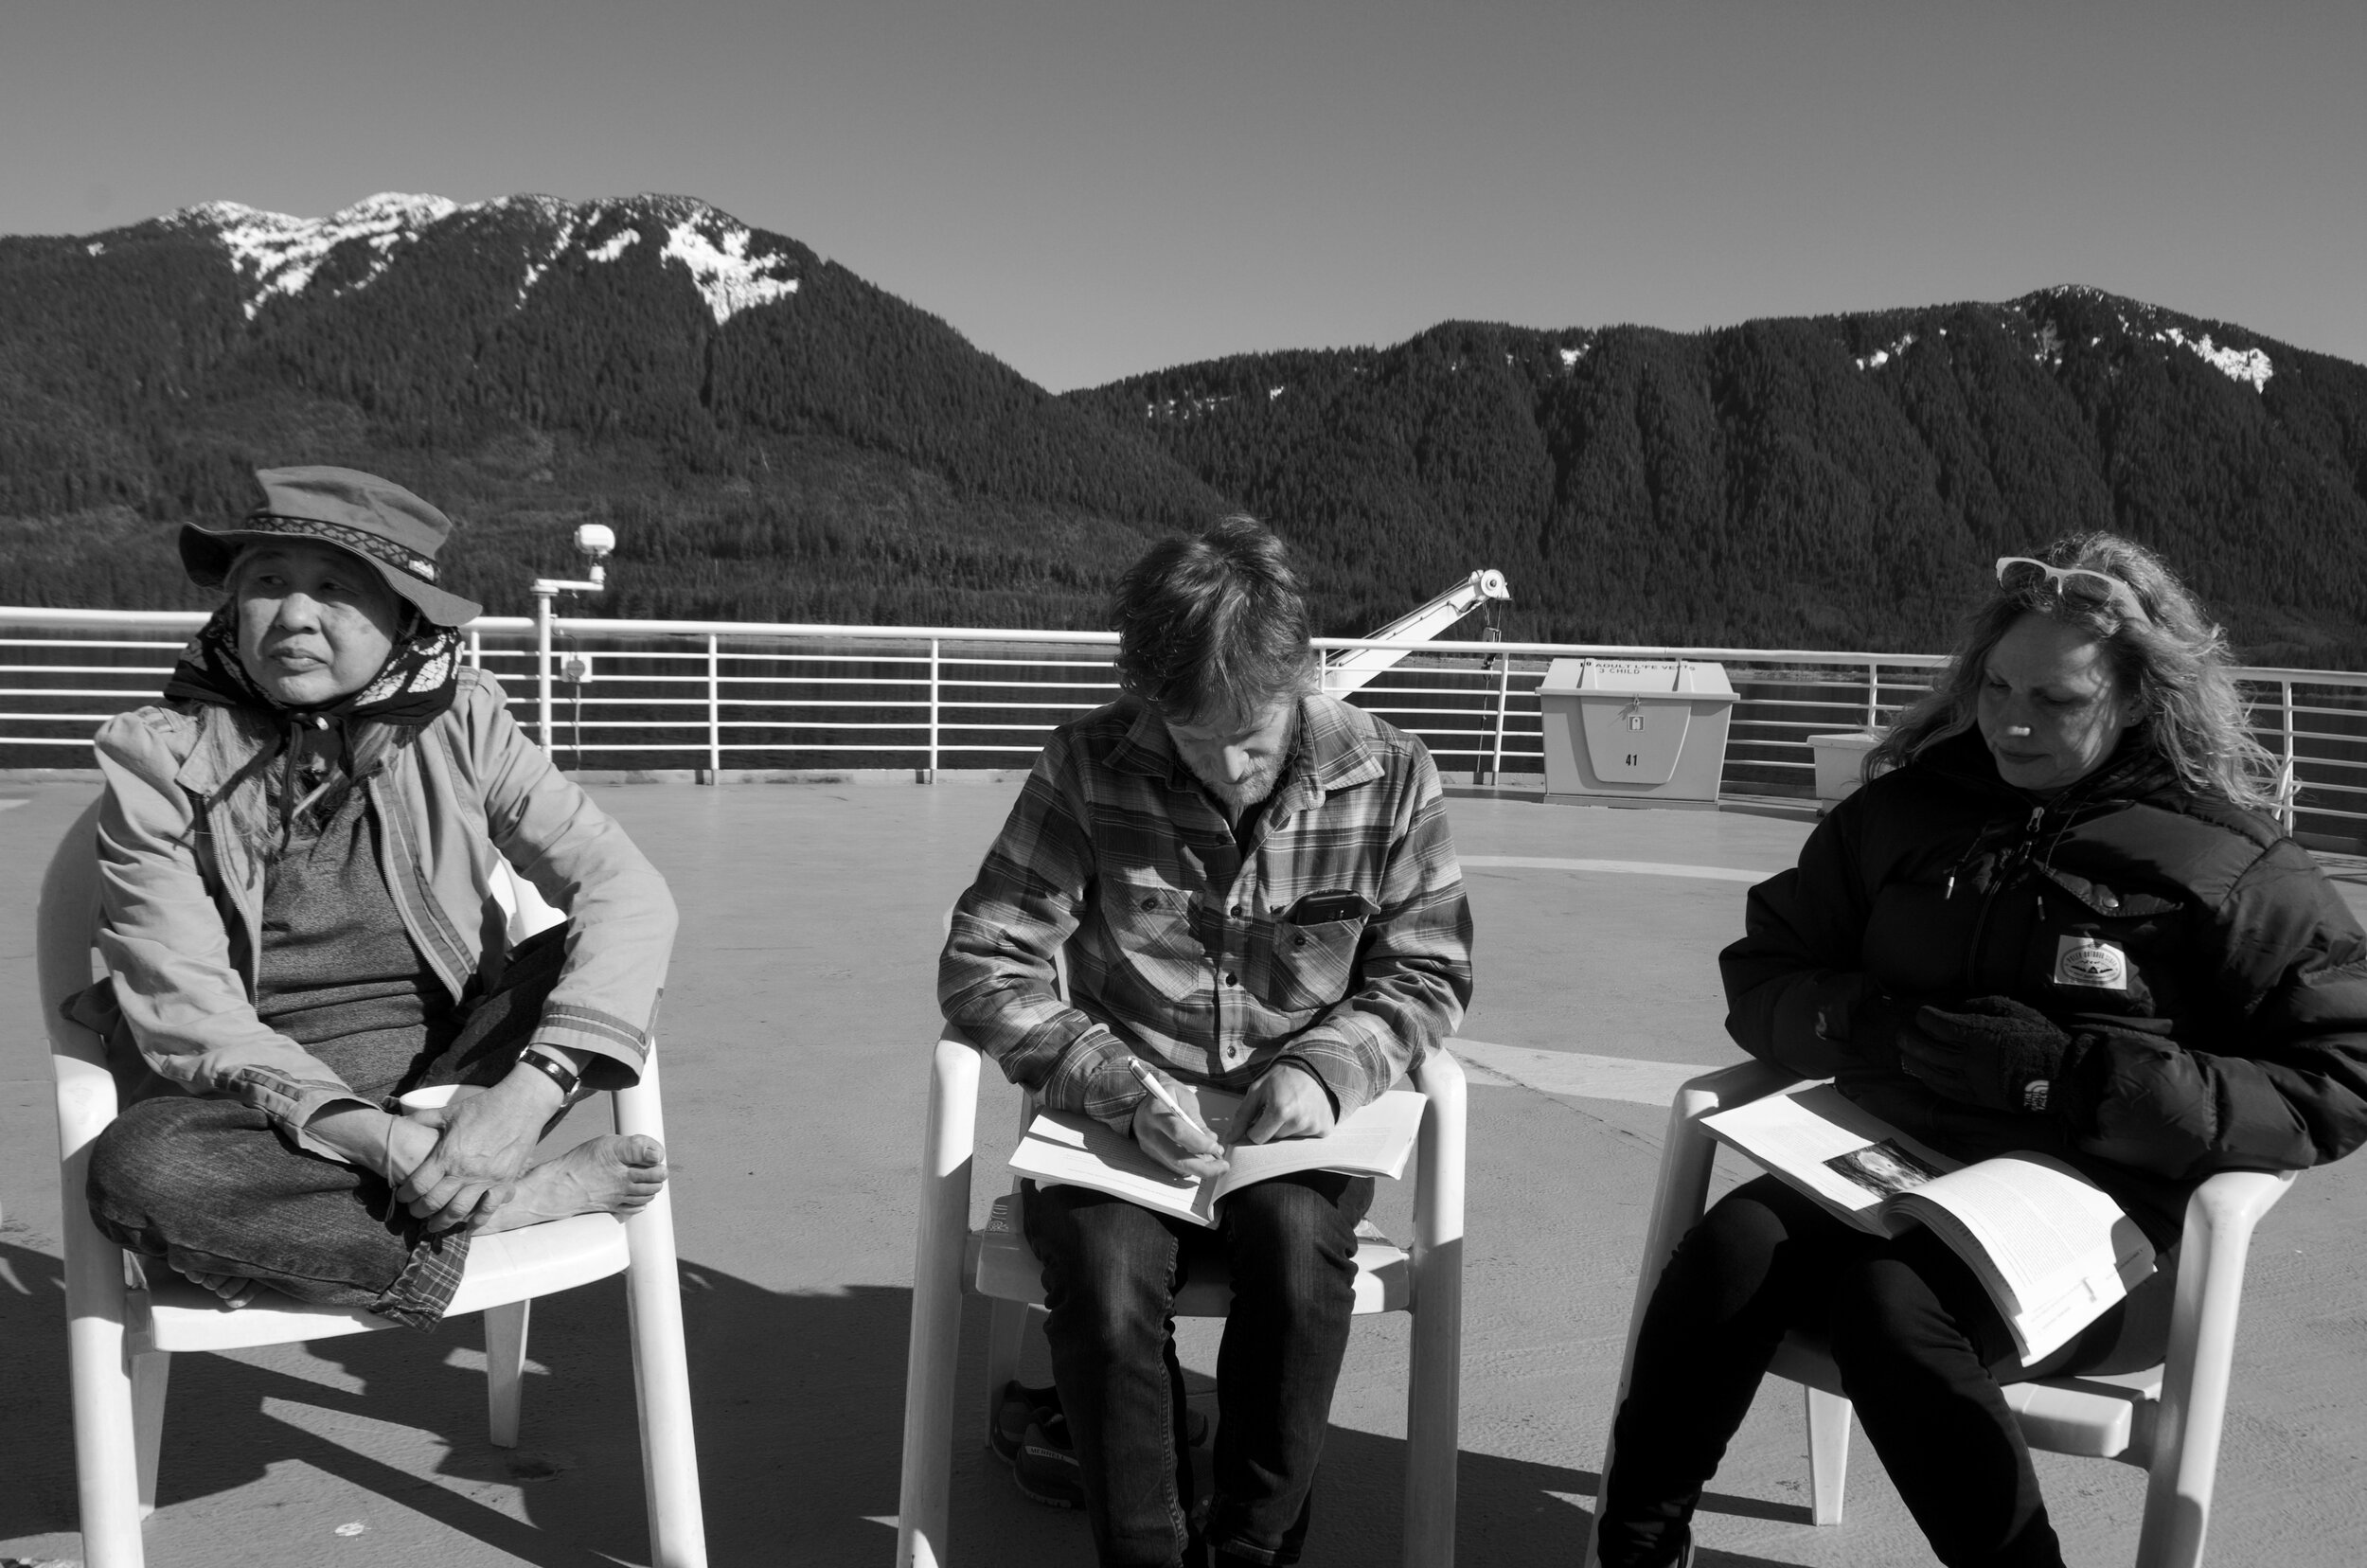  Prior to starting the residency, the five artists collectively added to a reader with writings inspired by the themes of the trip. During the trip, often on the ferry, the group got together every 2 or 3 days to discuss the readings. Sometimes they 